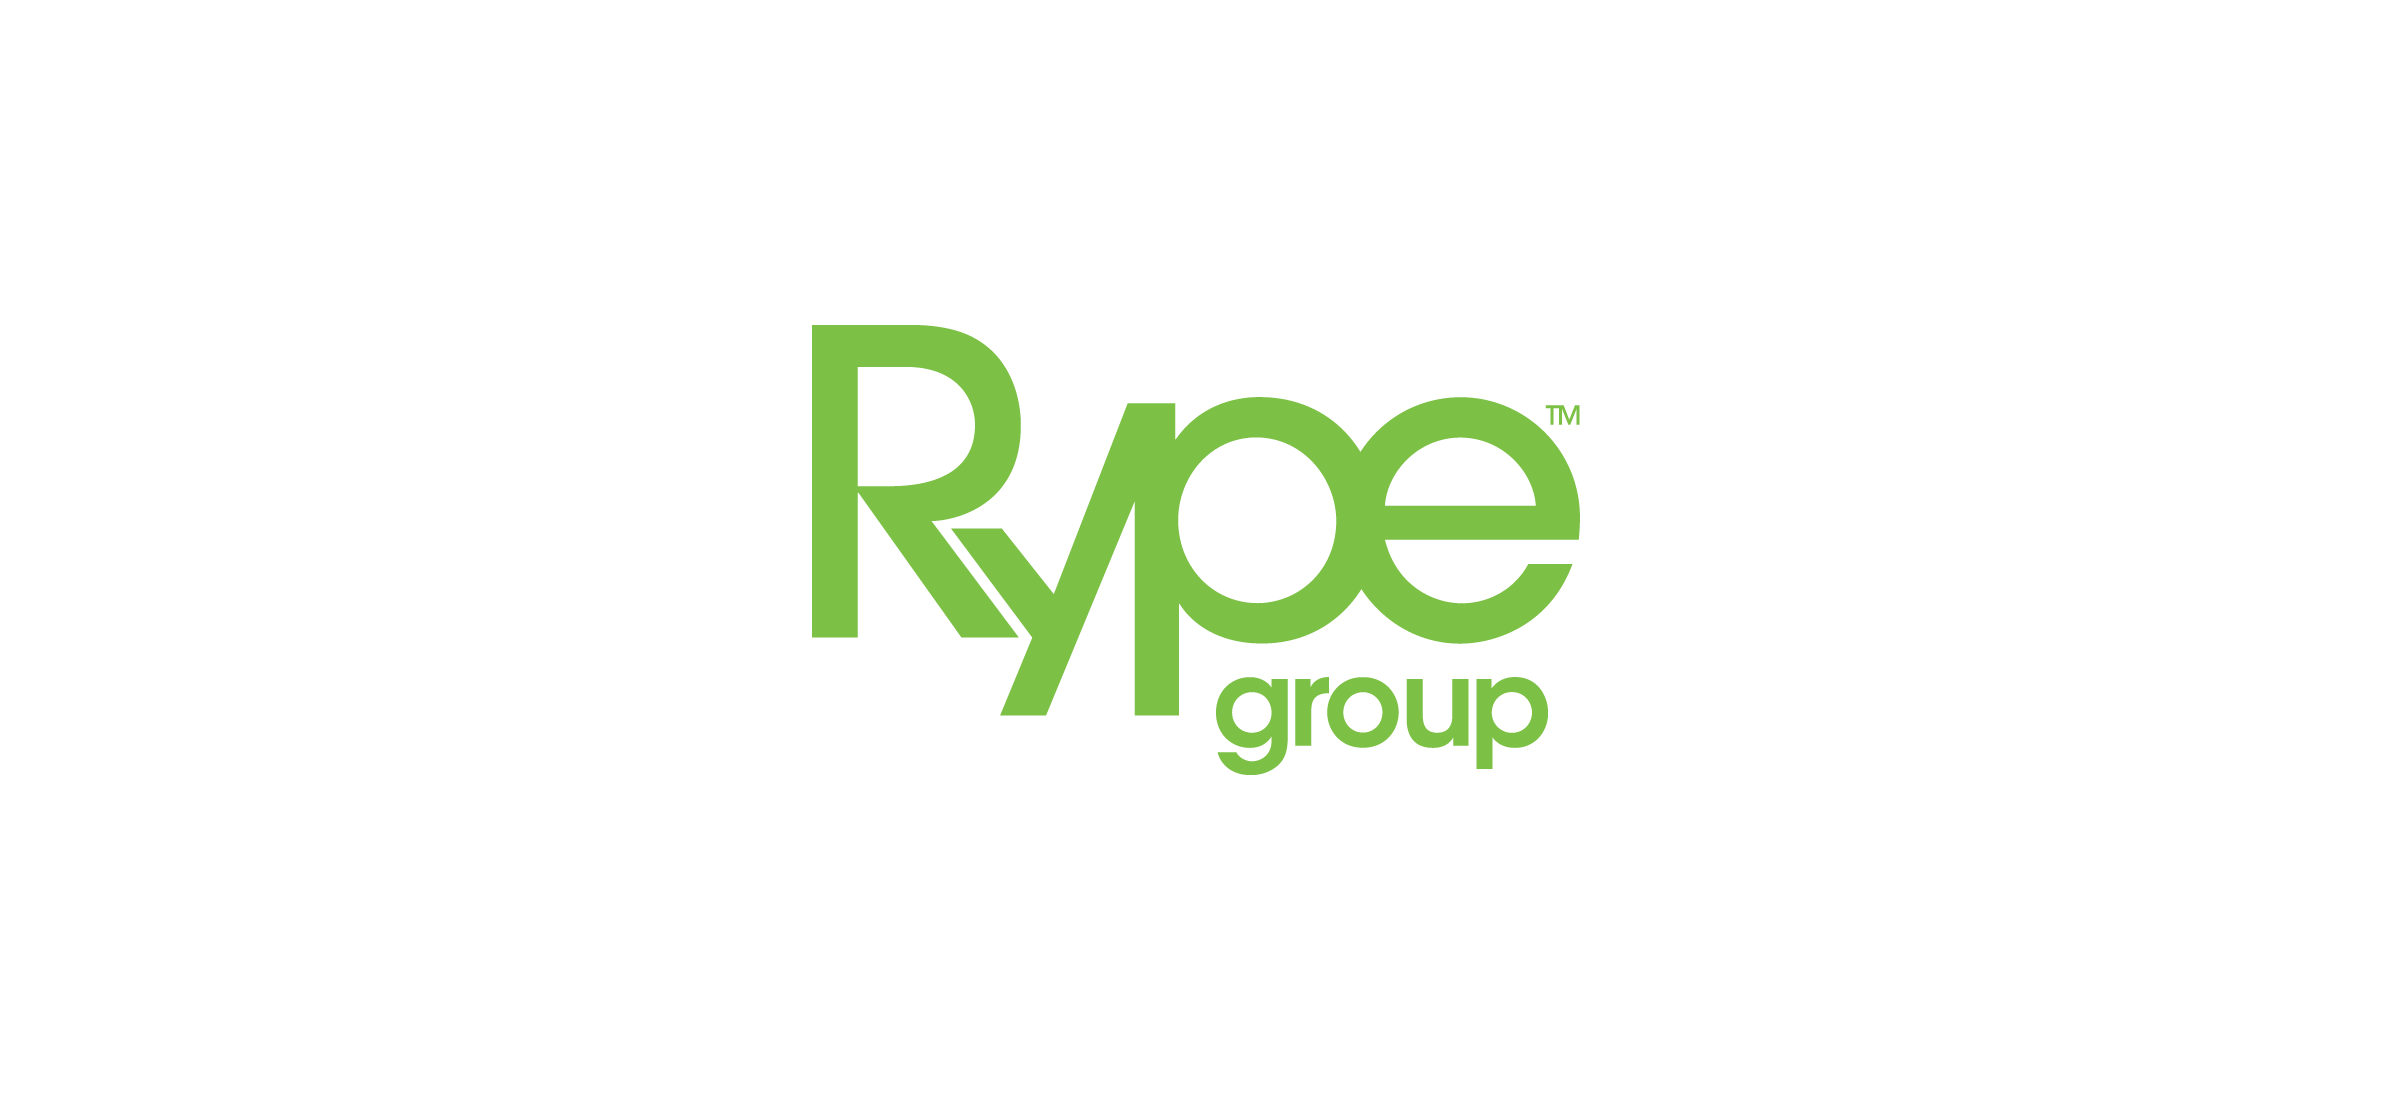 The Rype Group logo